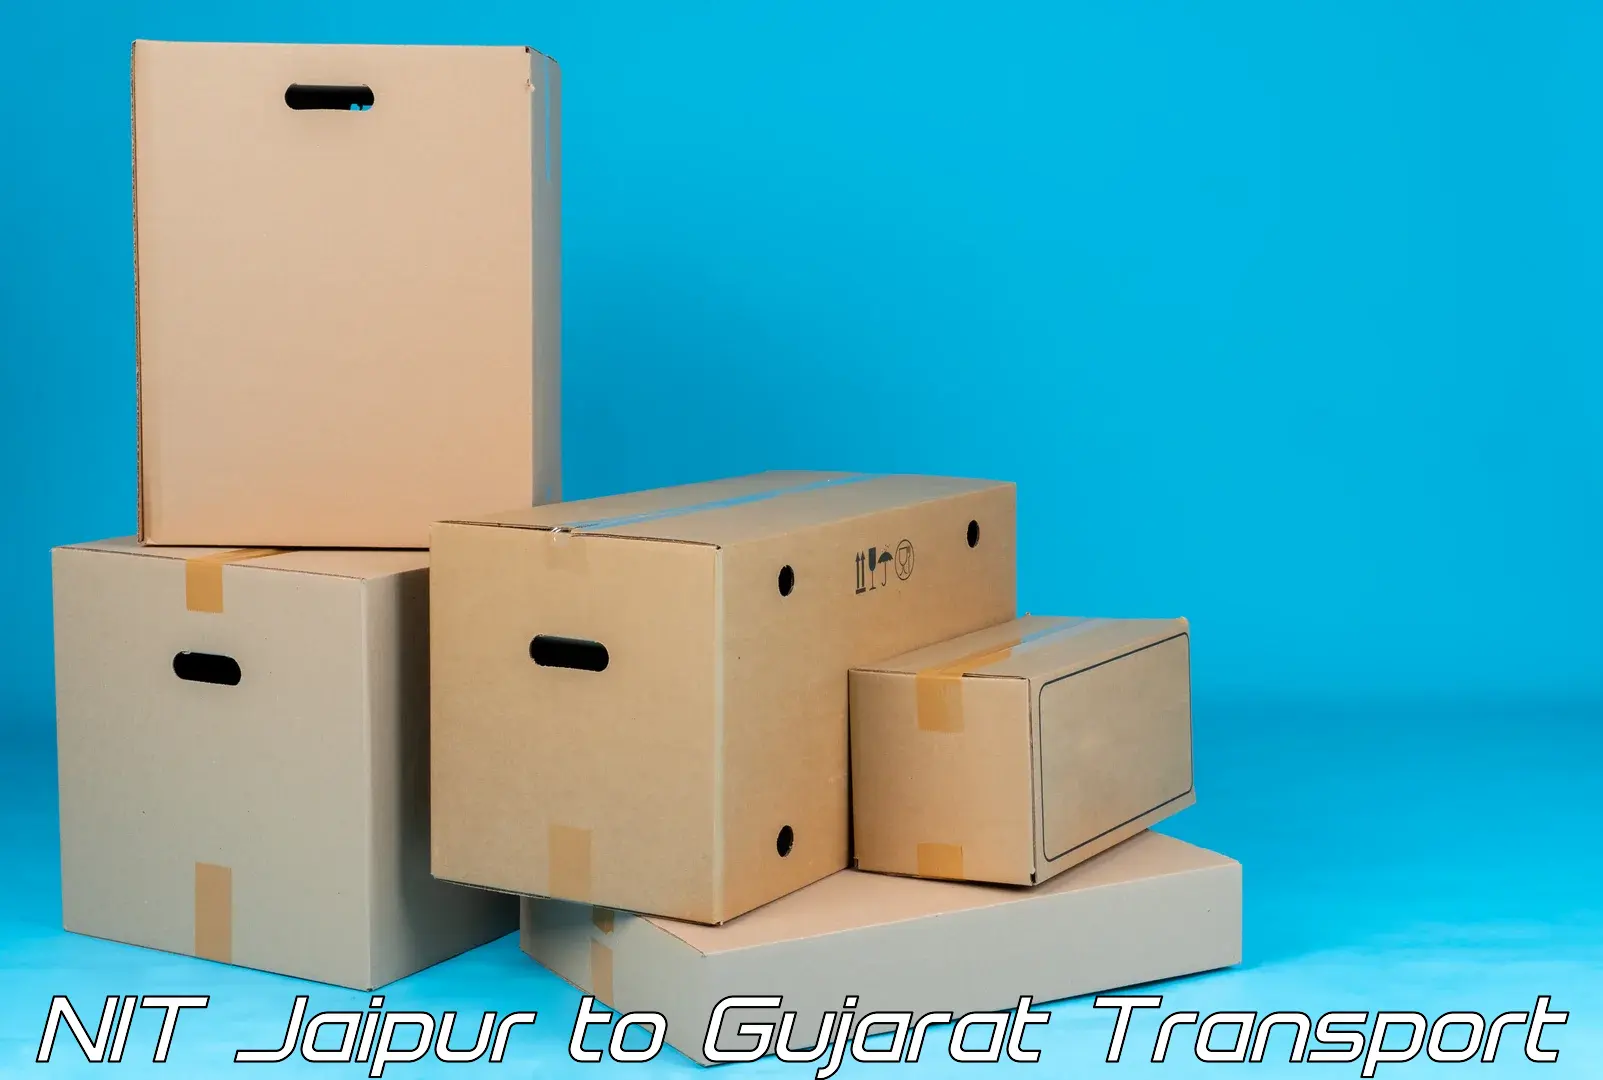 Container transport service NIT Jaipur to Ahmedabad